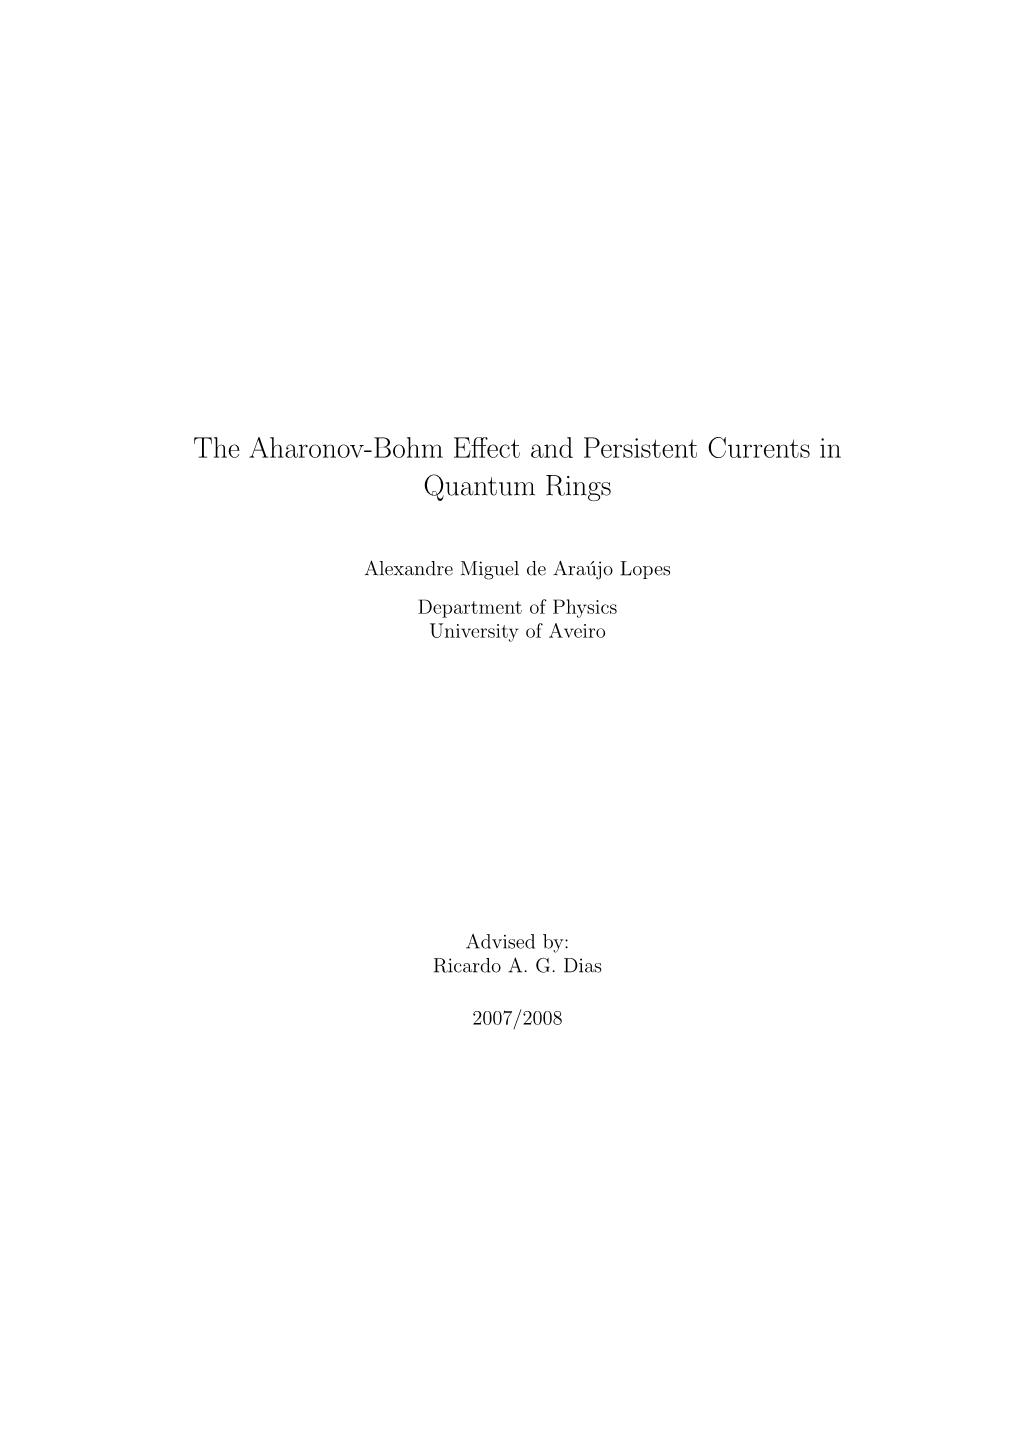 The Aharonov-Bohm Effect and Persistent Currents in Quantum Rings